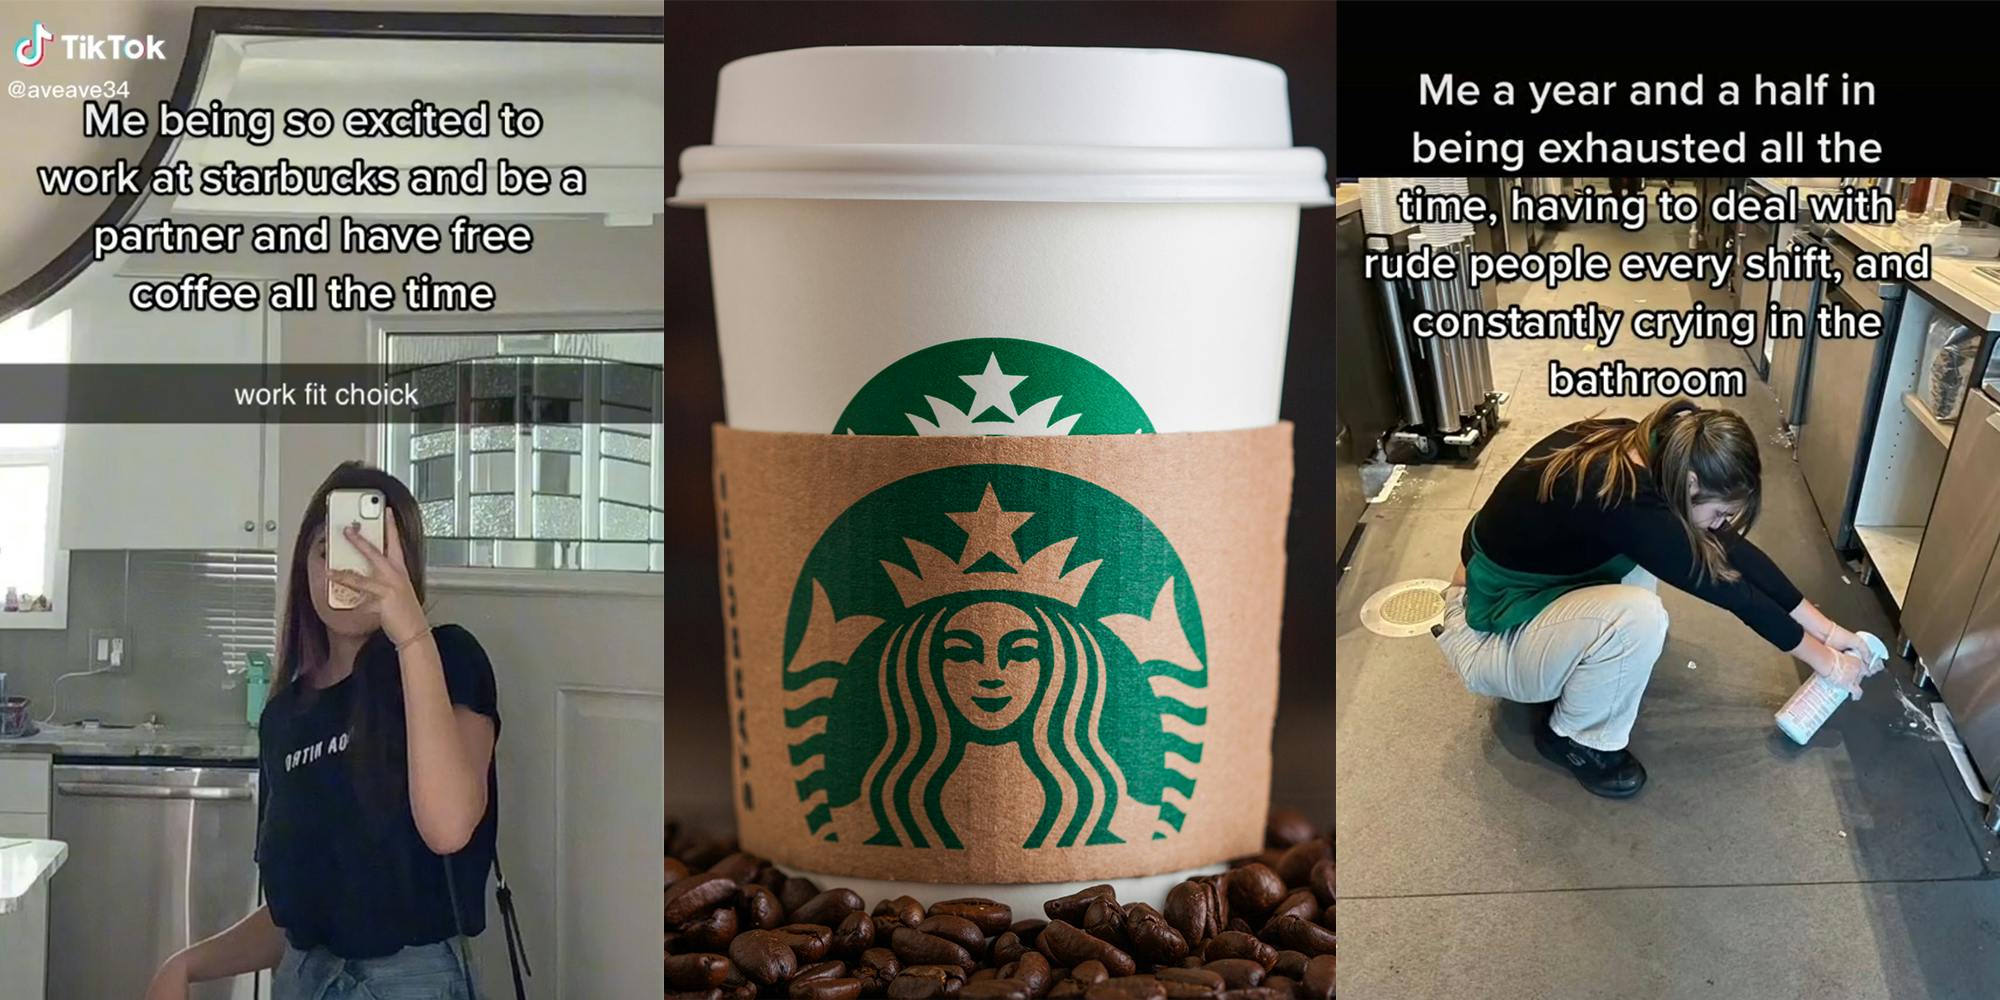 young woman with caption "Me being so excited to work at starbucks and be a partner and have free coffee all the time" (l) starbucks coffee cup with beans (c) woman spraying under cabinets with caption "Me a year and half in being exhausted all the time, having to deal with rude people every shift, and constantly crying in the bathroom" (r)